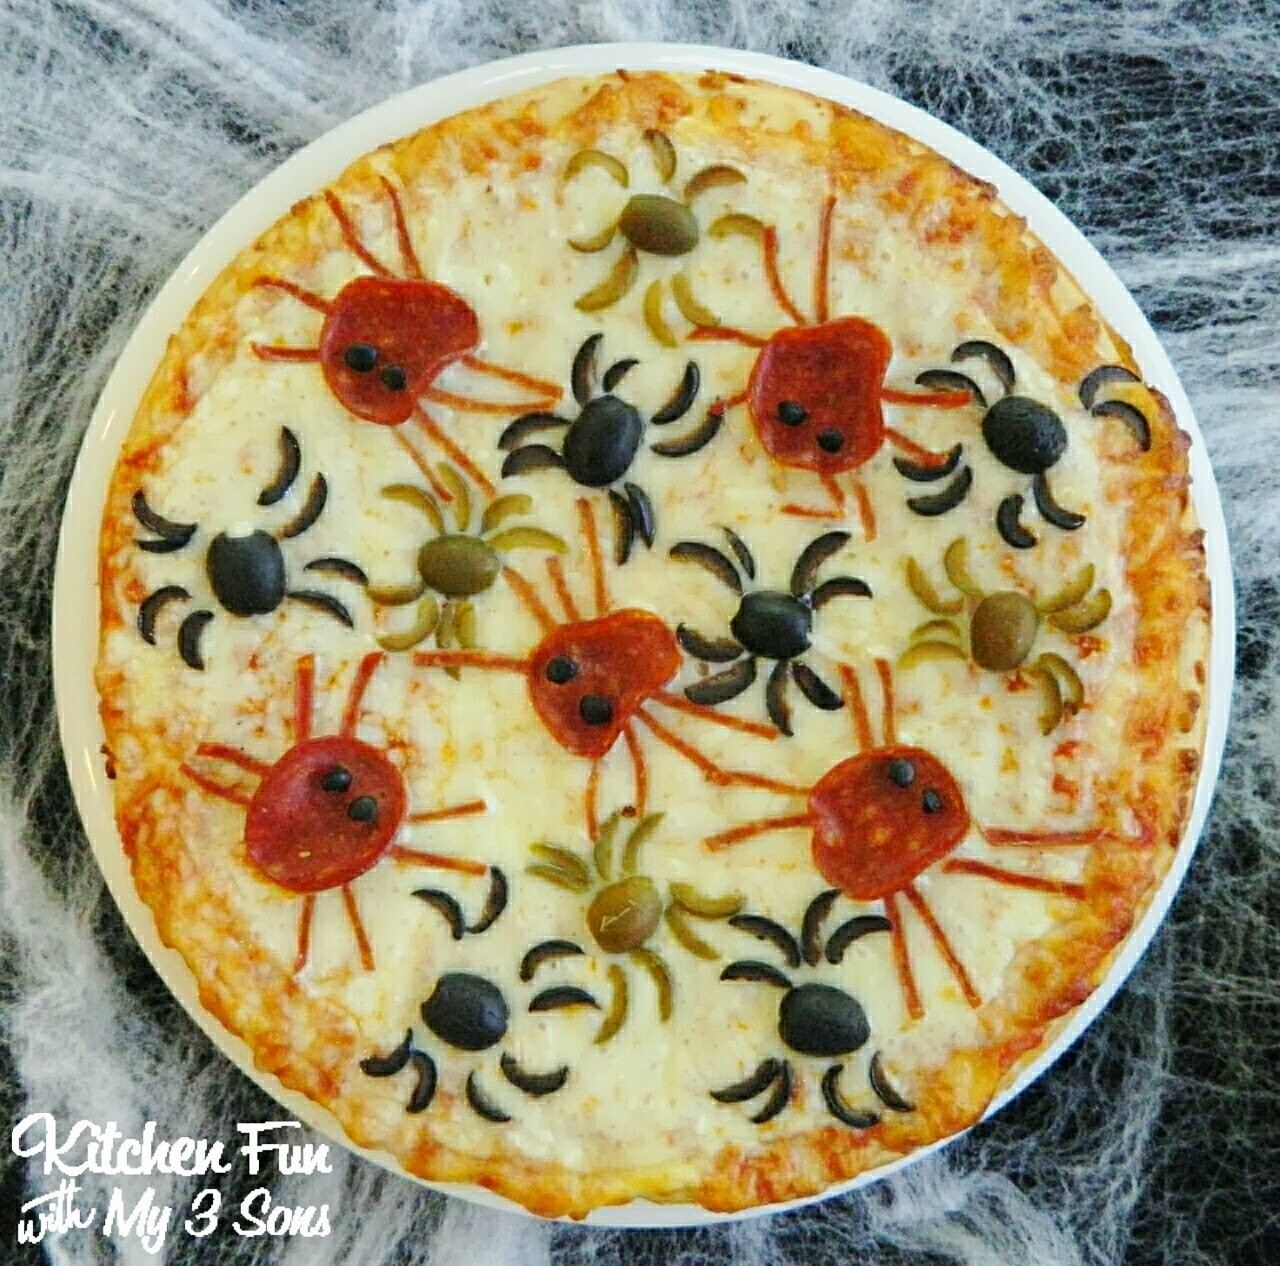 Halloween Pizza Party Ideas
 Halloween Spider Pizza Kitchen Fun With My 3 Sons